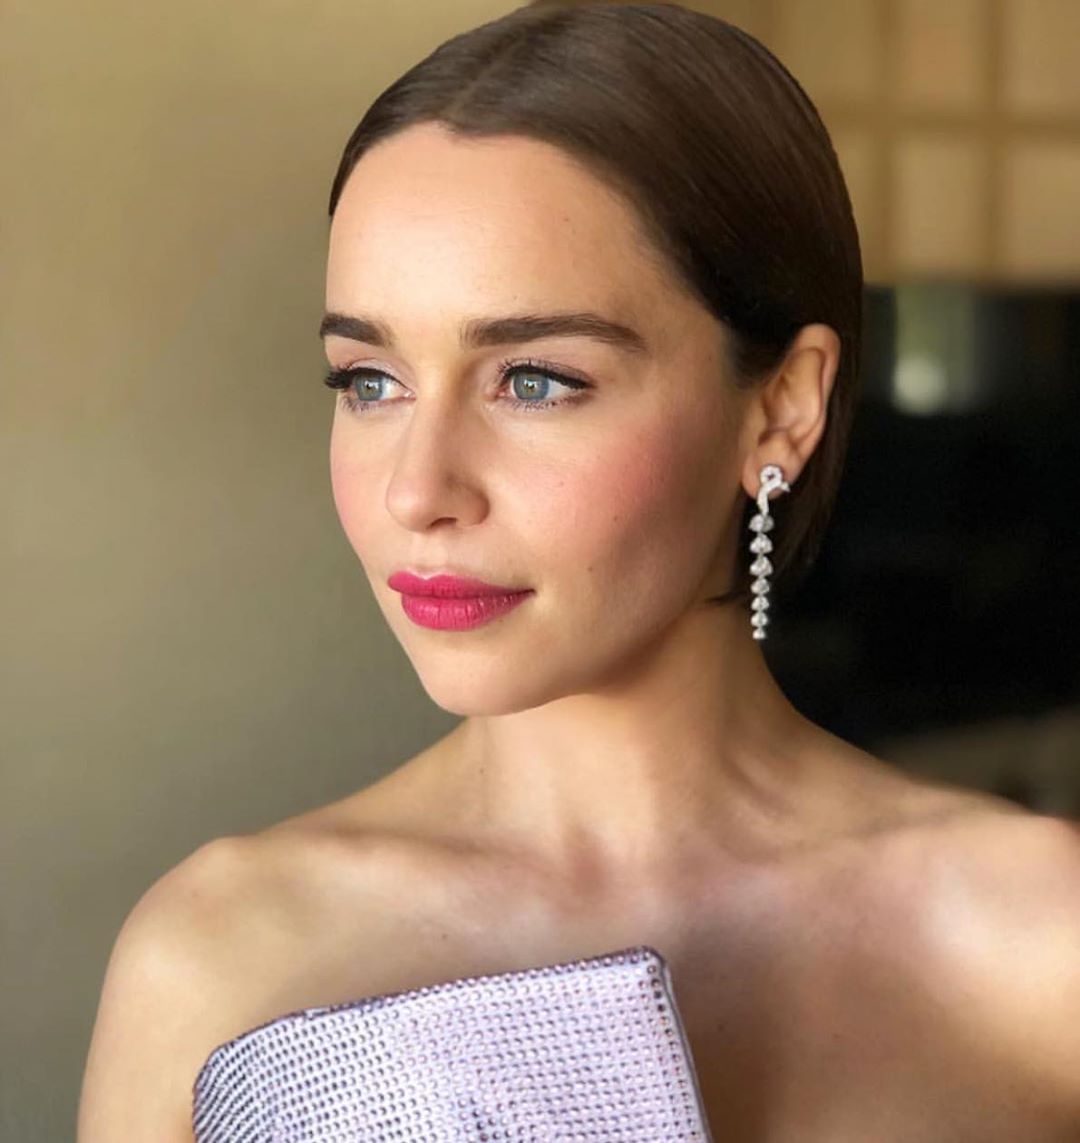 GOT Actress Emilia Clarke Reveals Her Health Problems That Almost Killed Her